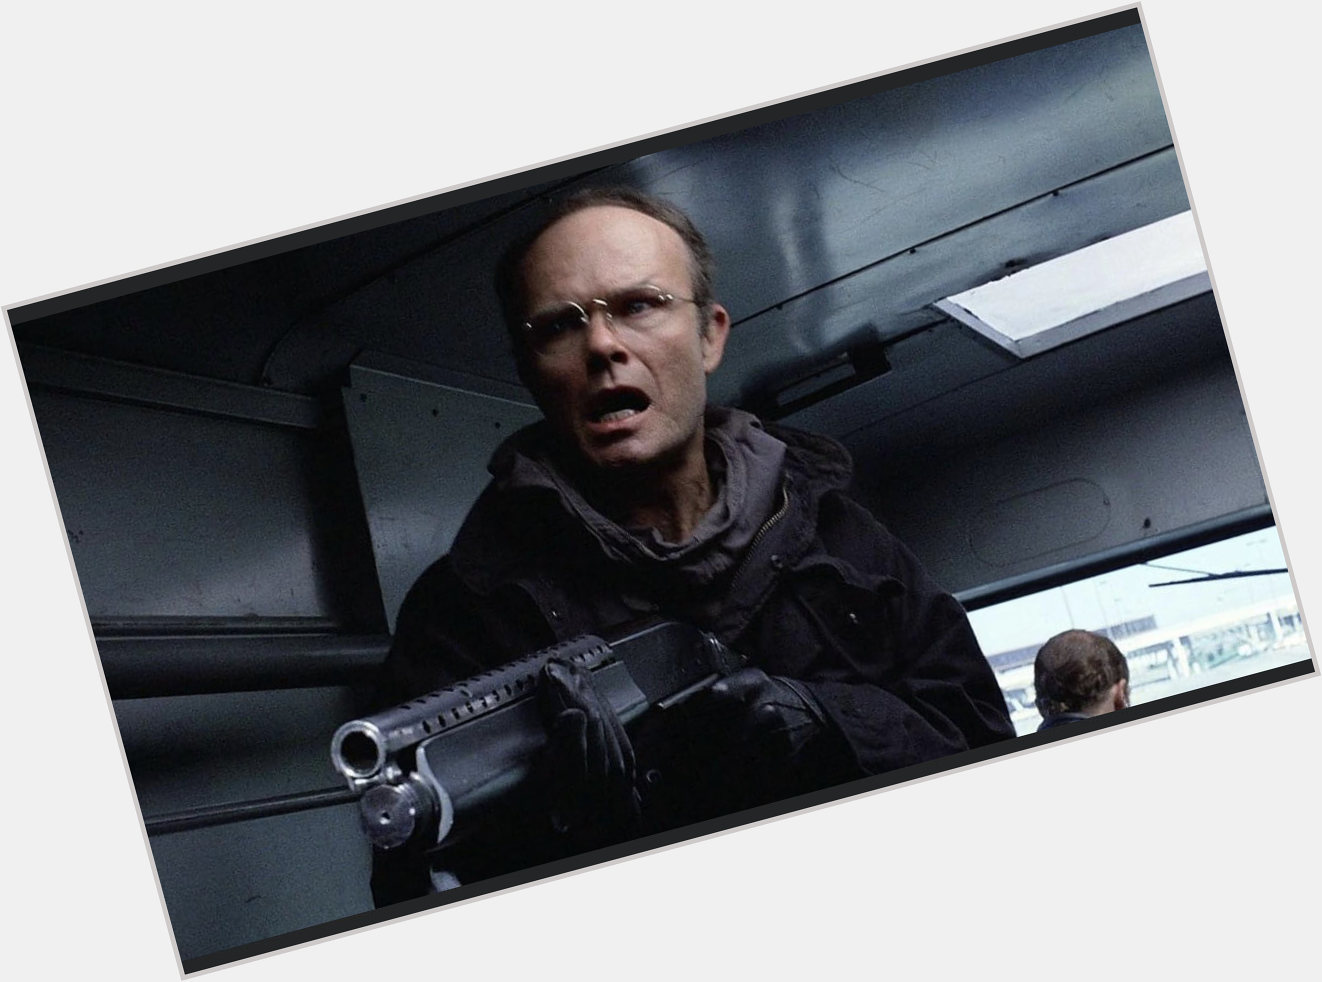 Happy birthday Clarence Boddicker, my vote for next PM
Actor, Kurtwood Smith was born on this day in 1943 